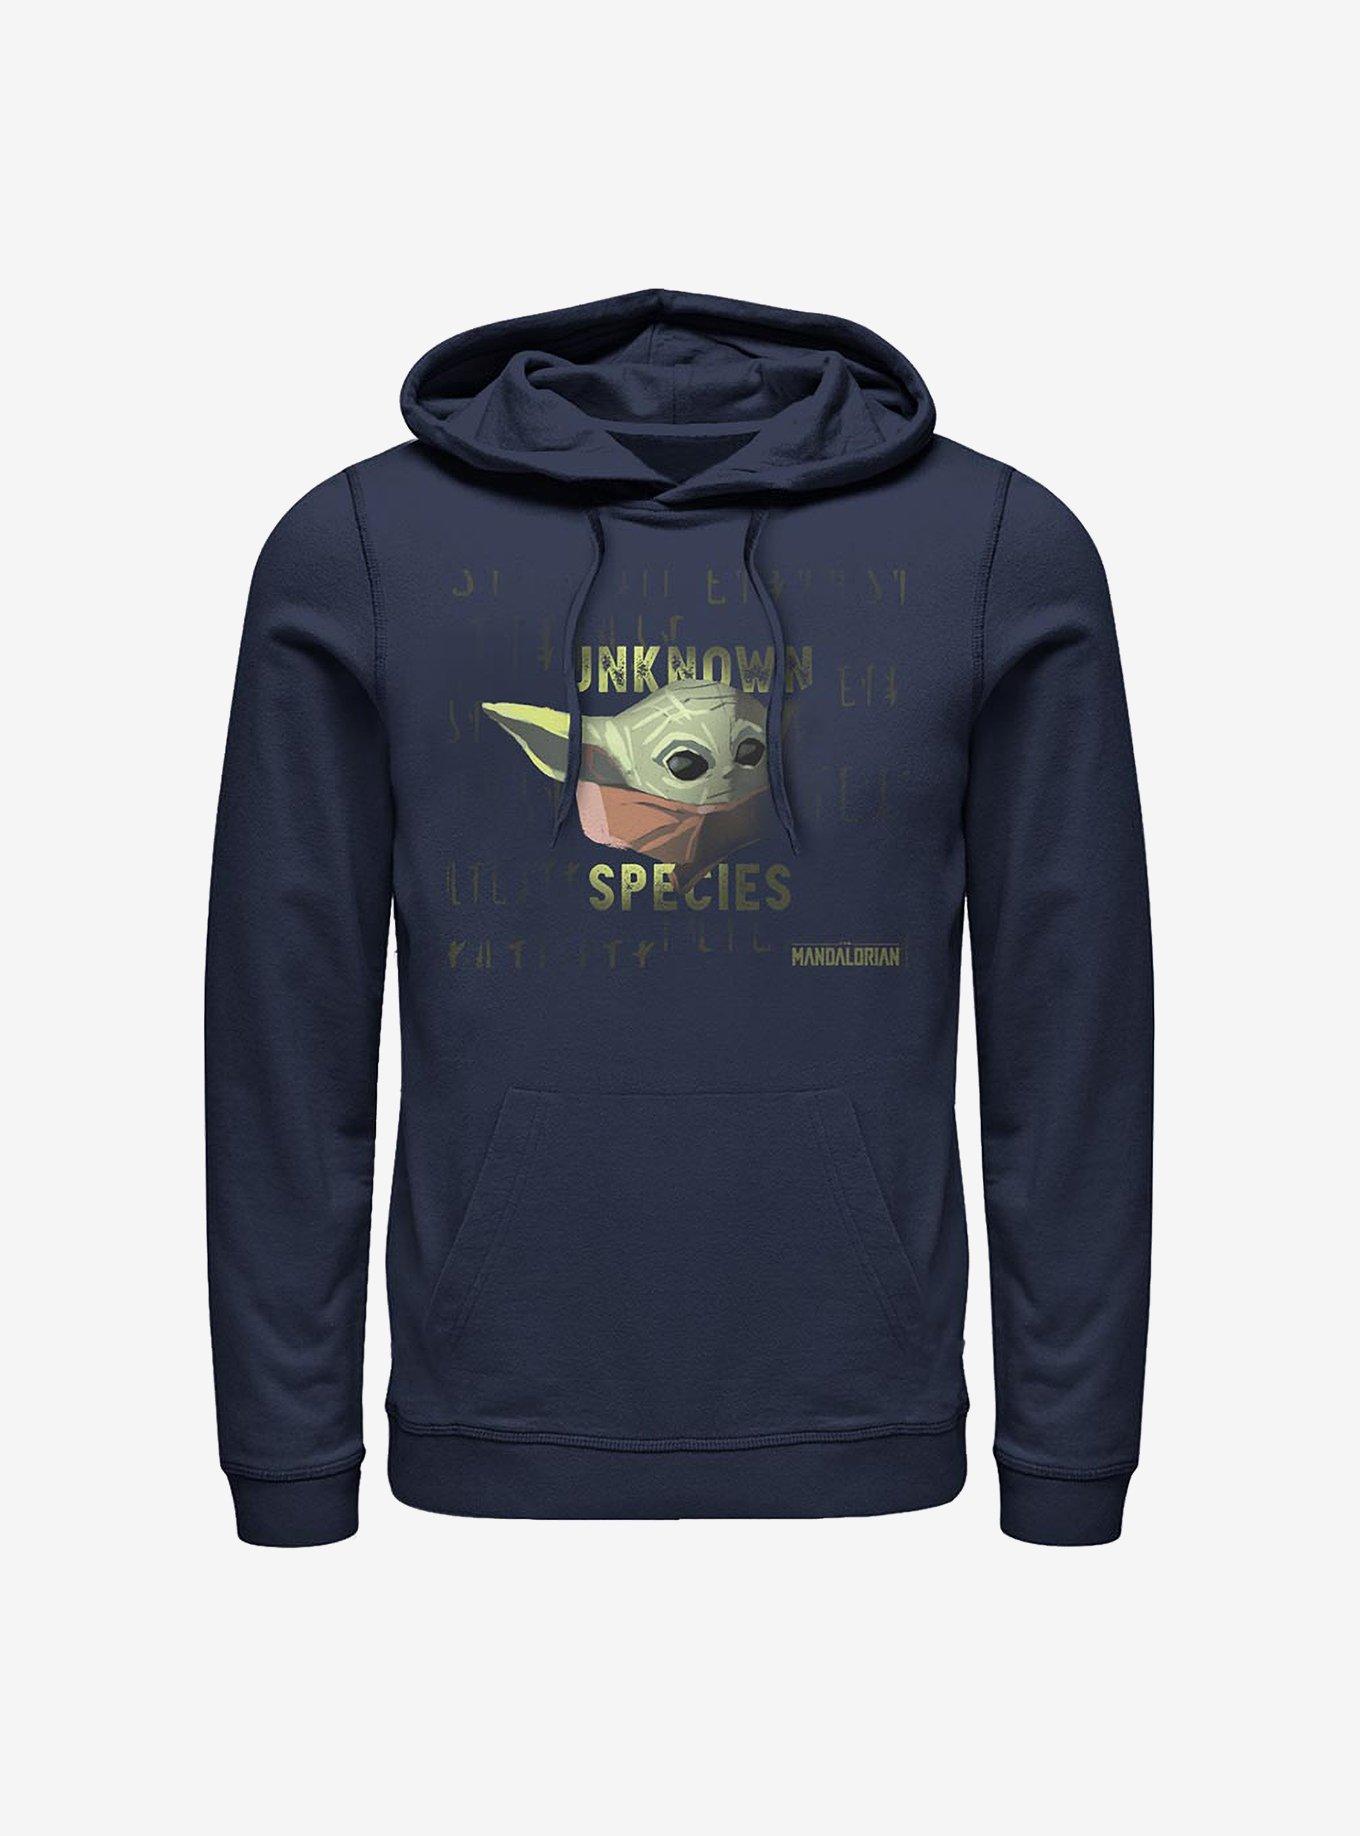 Star Wars The Mandalorian Unknown Species The Child Hoodie, NAVY, hi-res